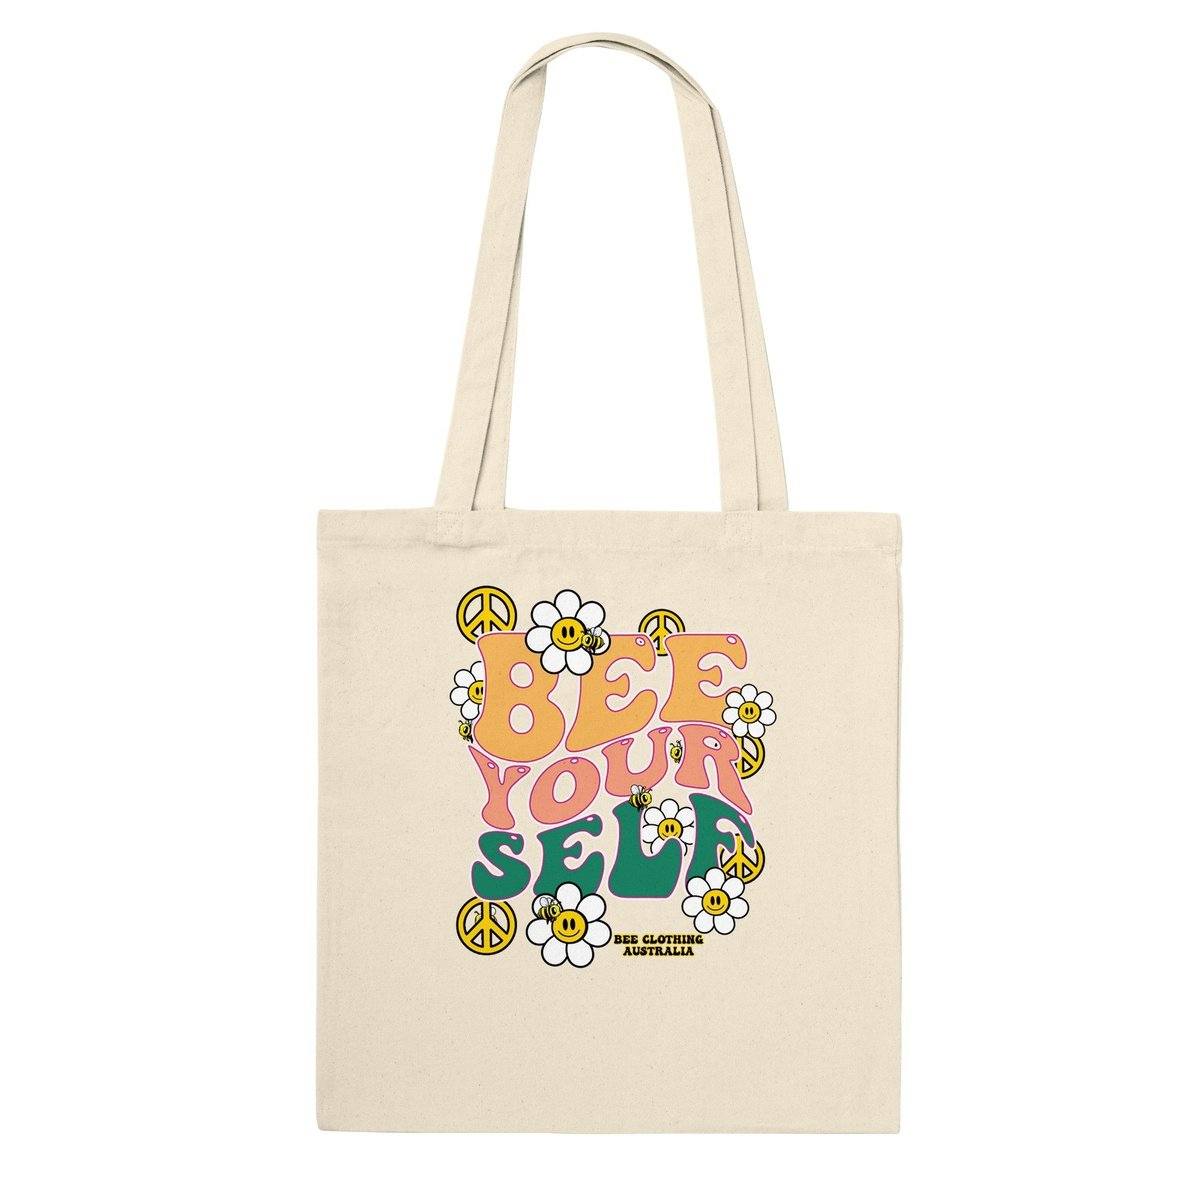 Bee Yourself groovy  - Classic Tote Bag Australia Online Color Natural